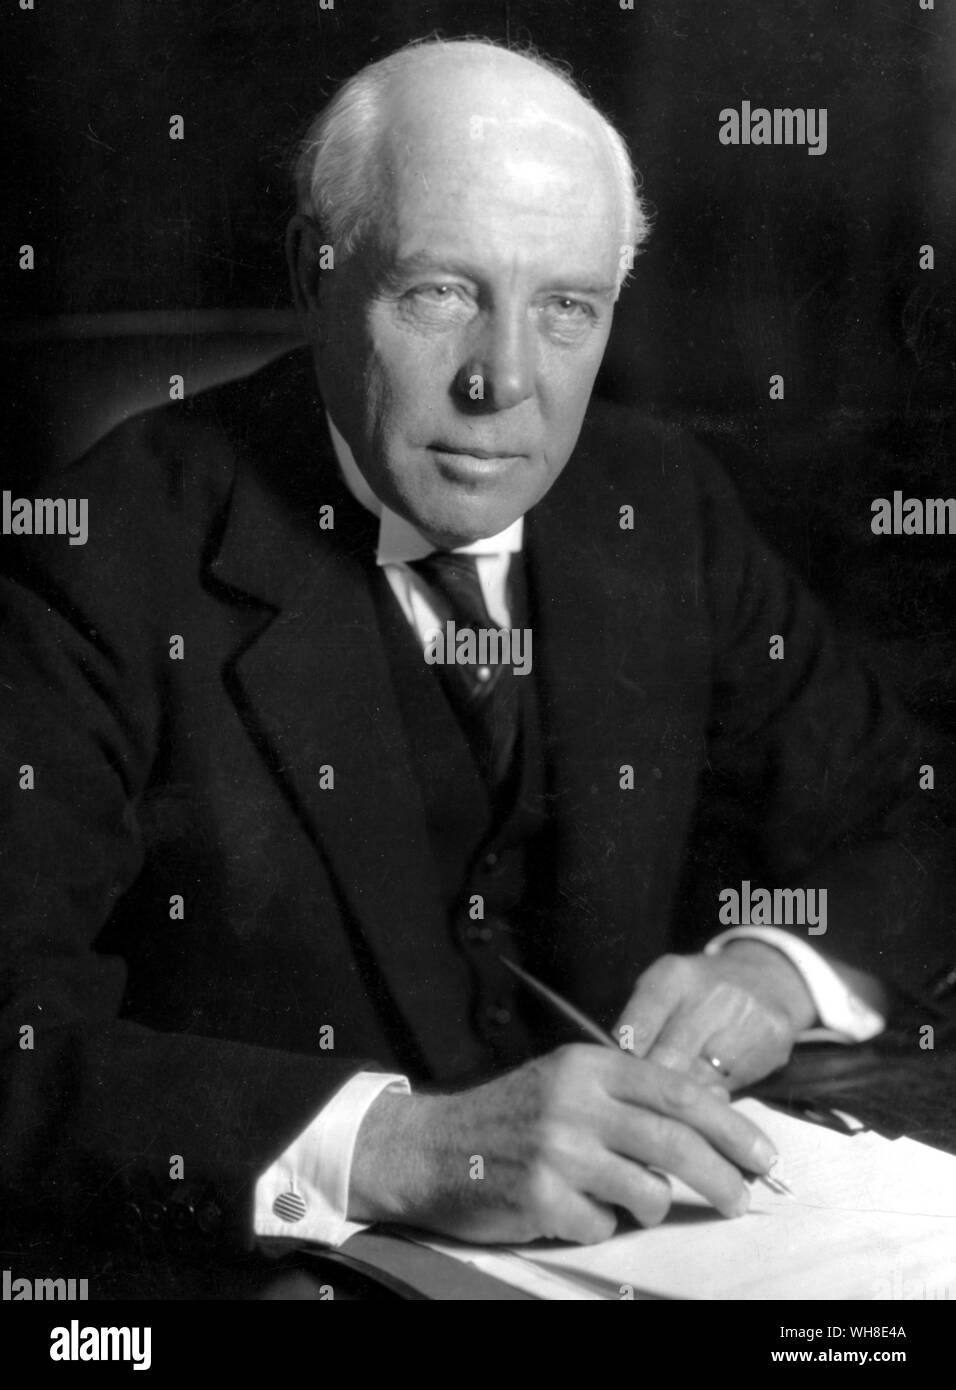 Lord Ashfield, the Right Honourable Sir Albert Henry Stanley, 1st Baron Ashfield, (1874-1948). Managing Director, then Chairman of the Underground Electric Railways Company of London and later Chairman of the London Transport Passenger Board during the London Underground's greatest period of expansion.. . Stock Photo